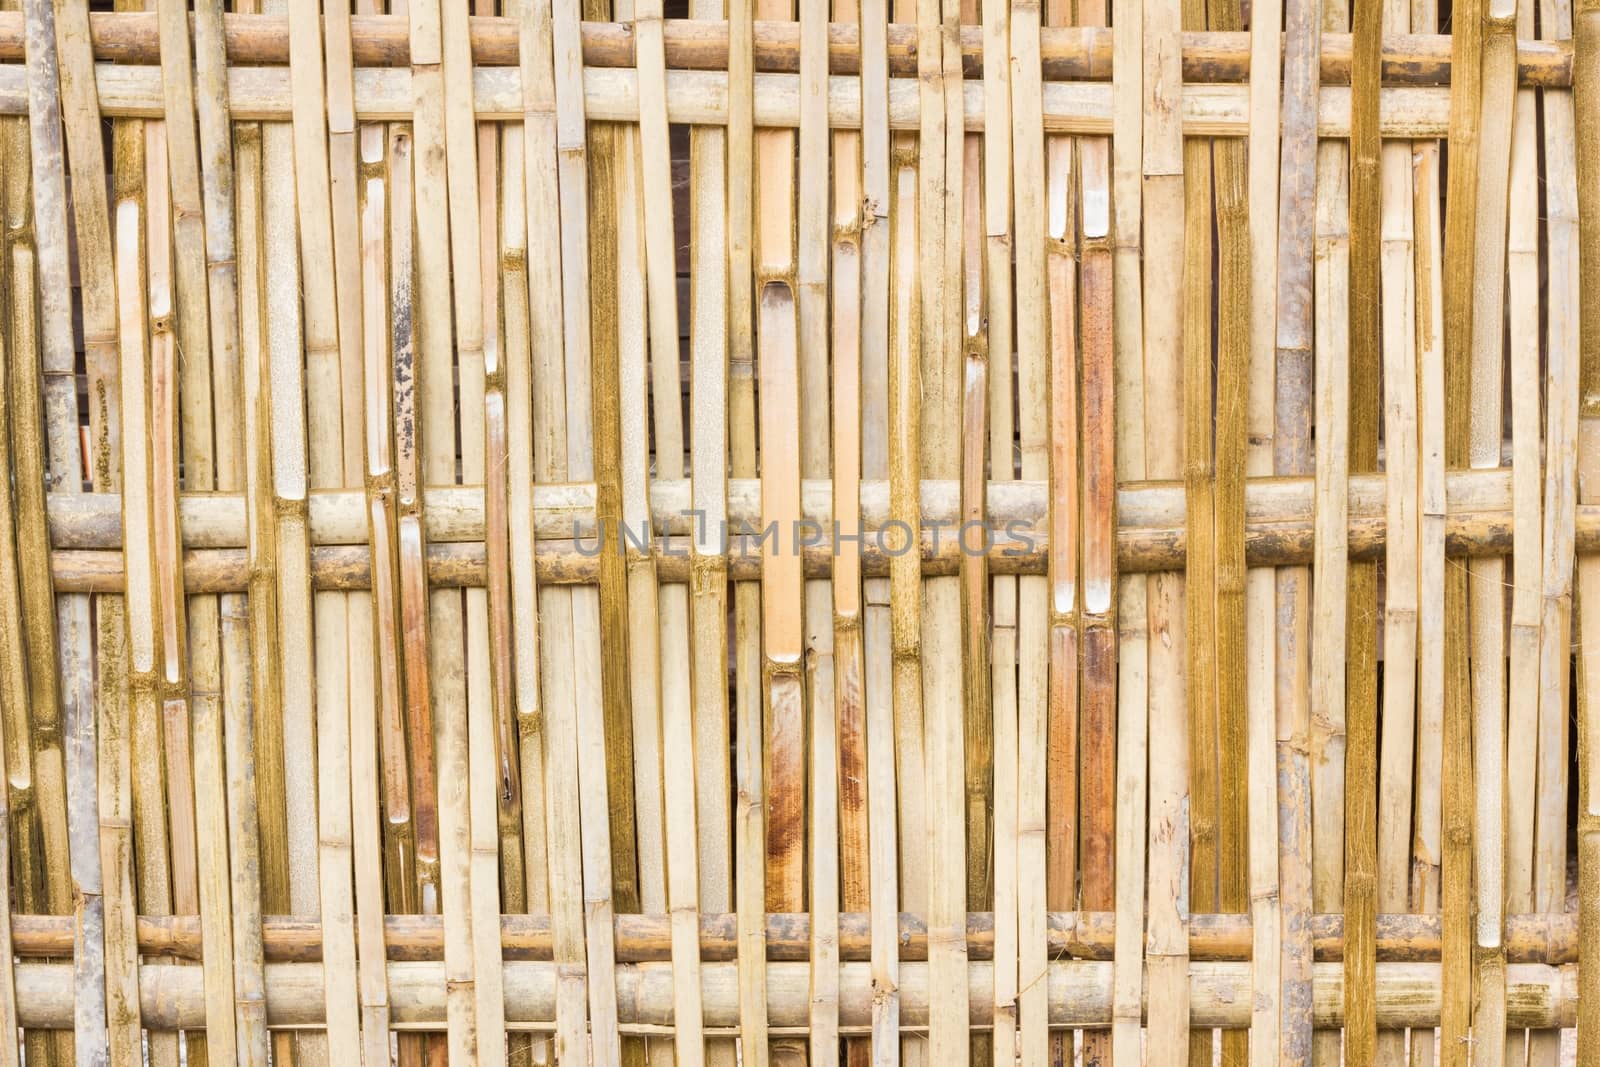 Bamboo fences in rural areas, horizontal background